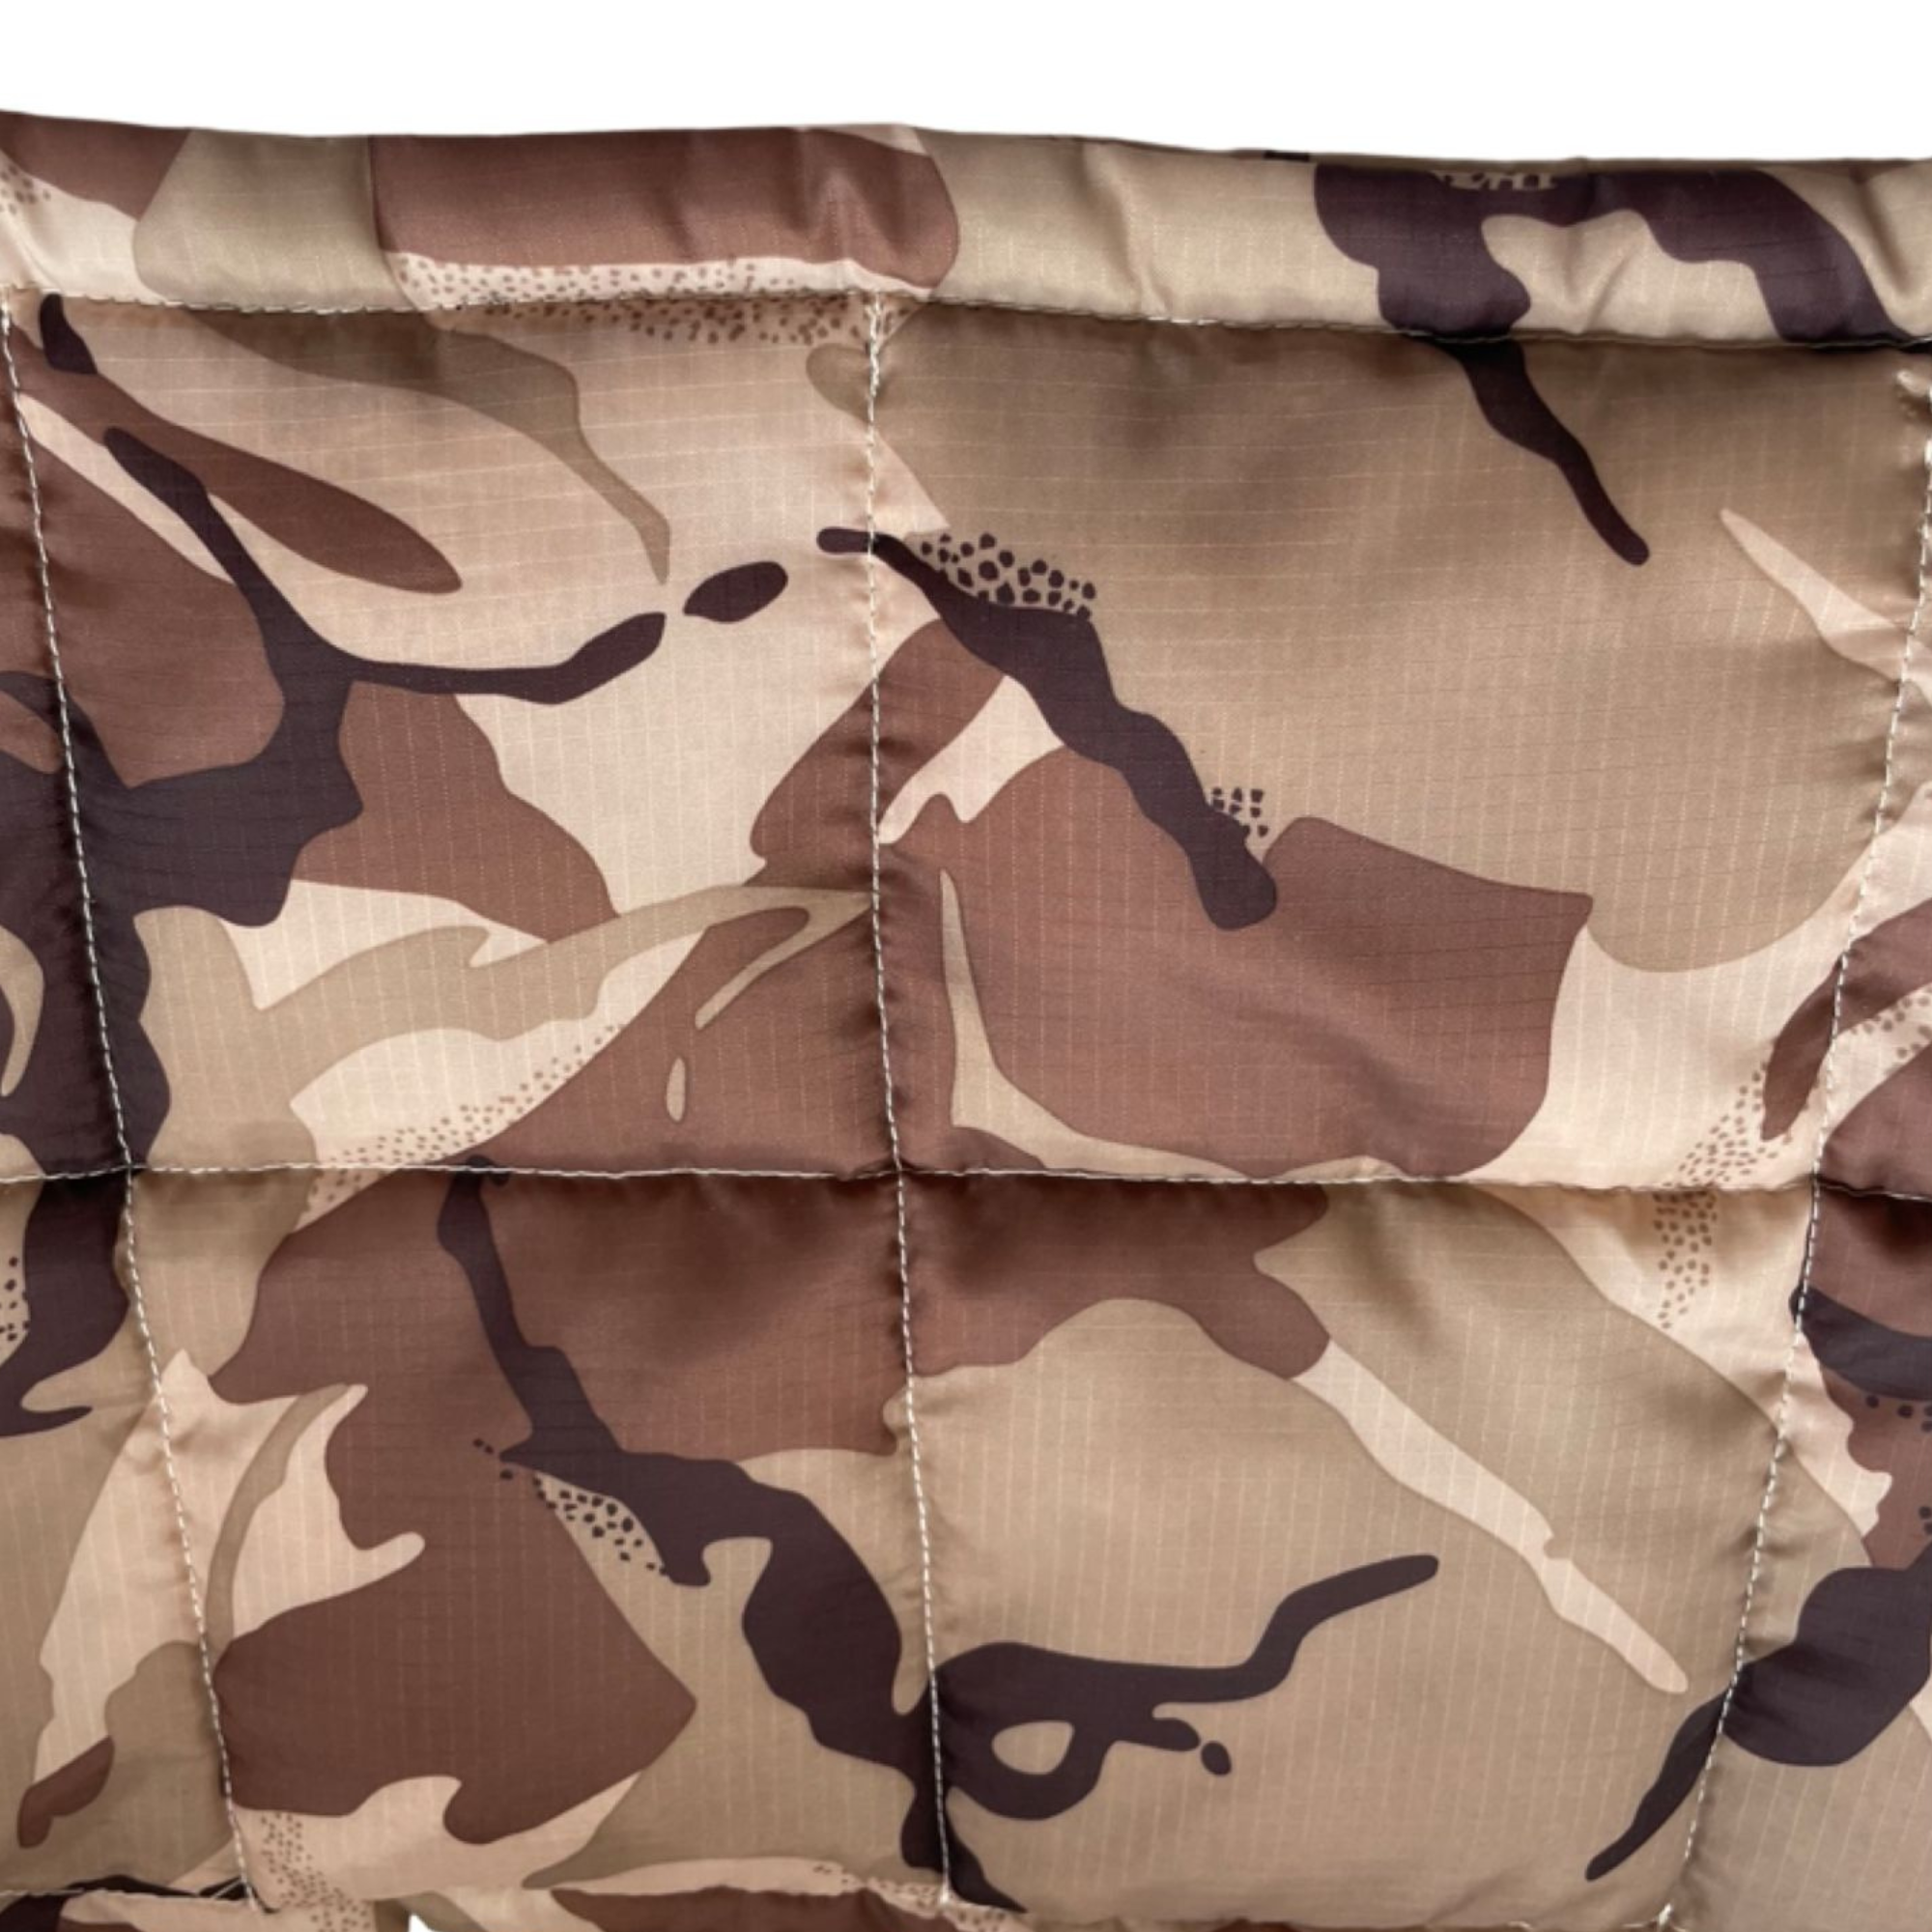 Camo Weighted Lap Pad, Sensory Education's Weighted Lap Pads are designed to apply calming deep pressure to the lap and upper legs whilst the user is sitting down. The weight is provided by plastic beads sewn into small individual cells that mould themselves to the body or legs. The user experiences the deep pressure from the weight of the Lap Pad which has a calming effect helping attention span and reducing excessive fidgeting. Because of the size of the Lap Pad, it is a cost effective, safe and portable 